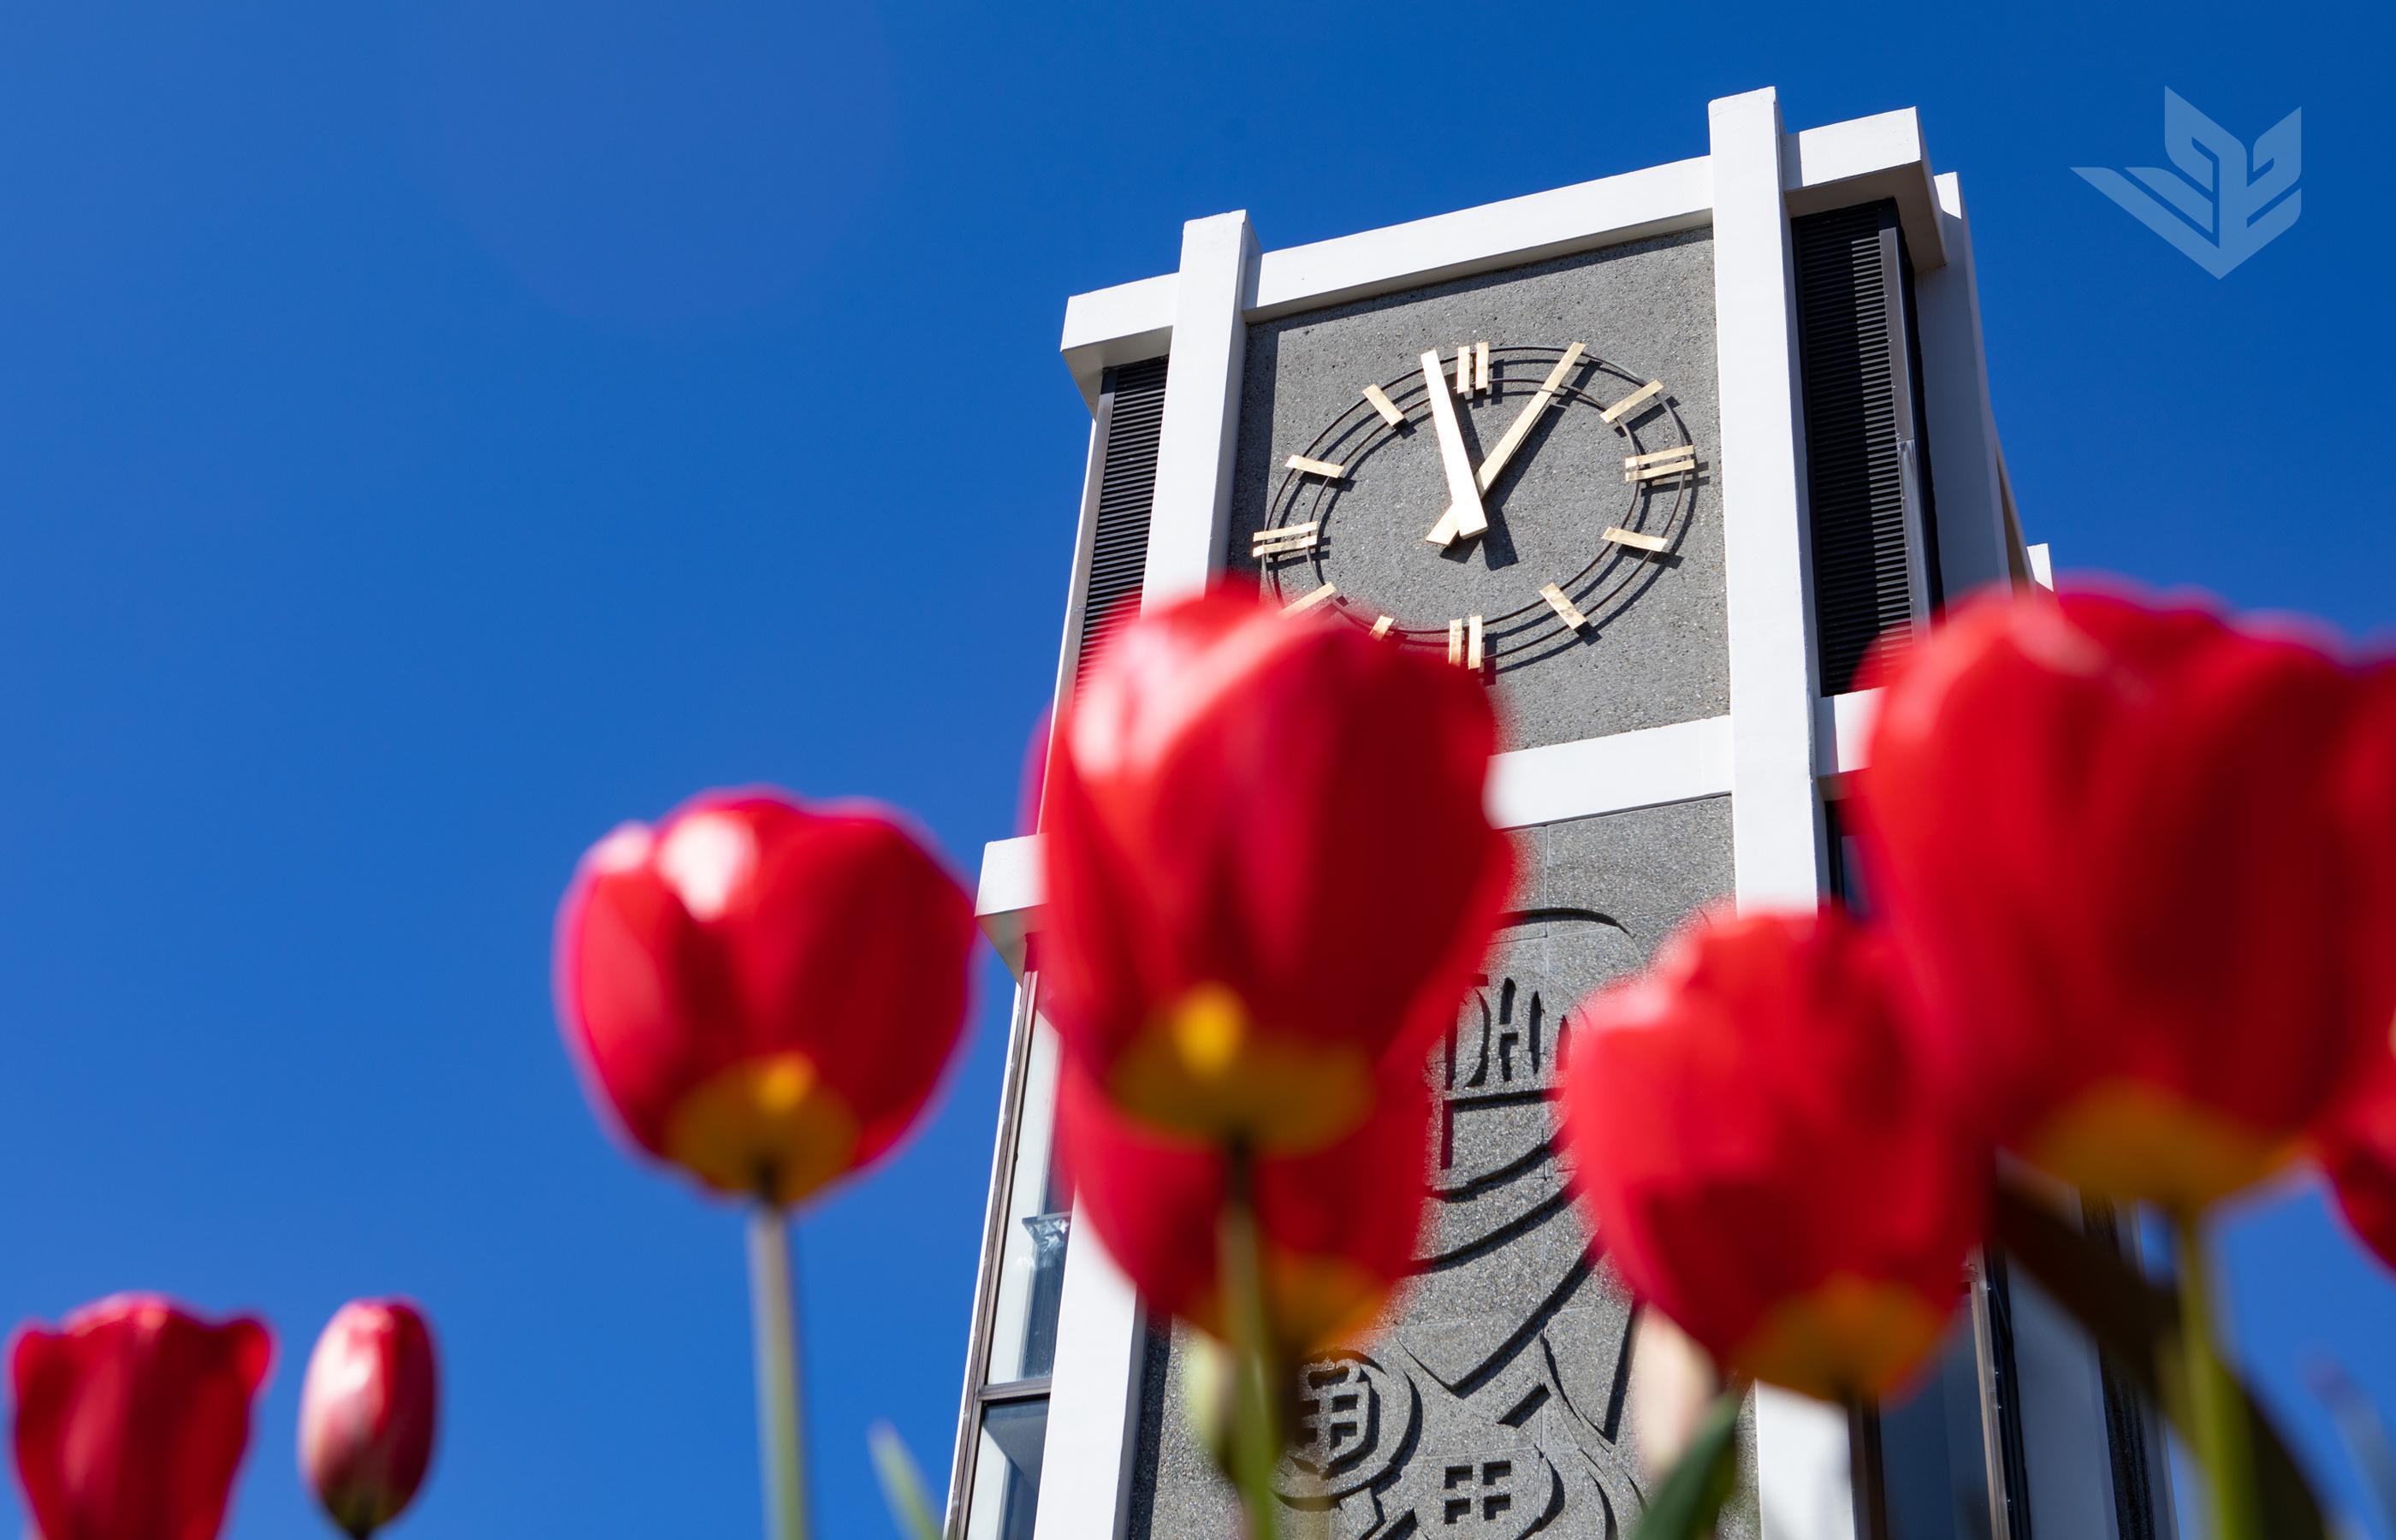 Bright red tulips in the foreground of a photo of Demaray Hall's iconic clocktower